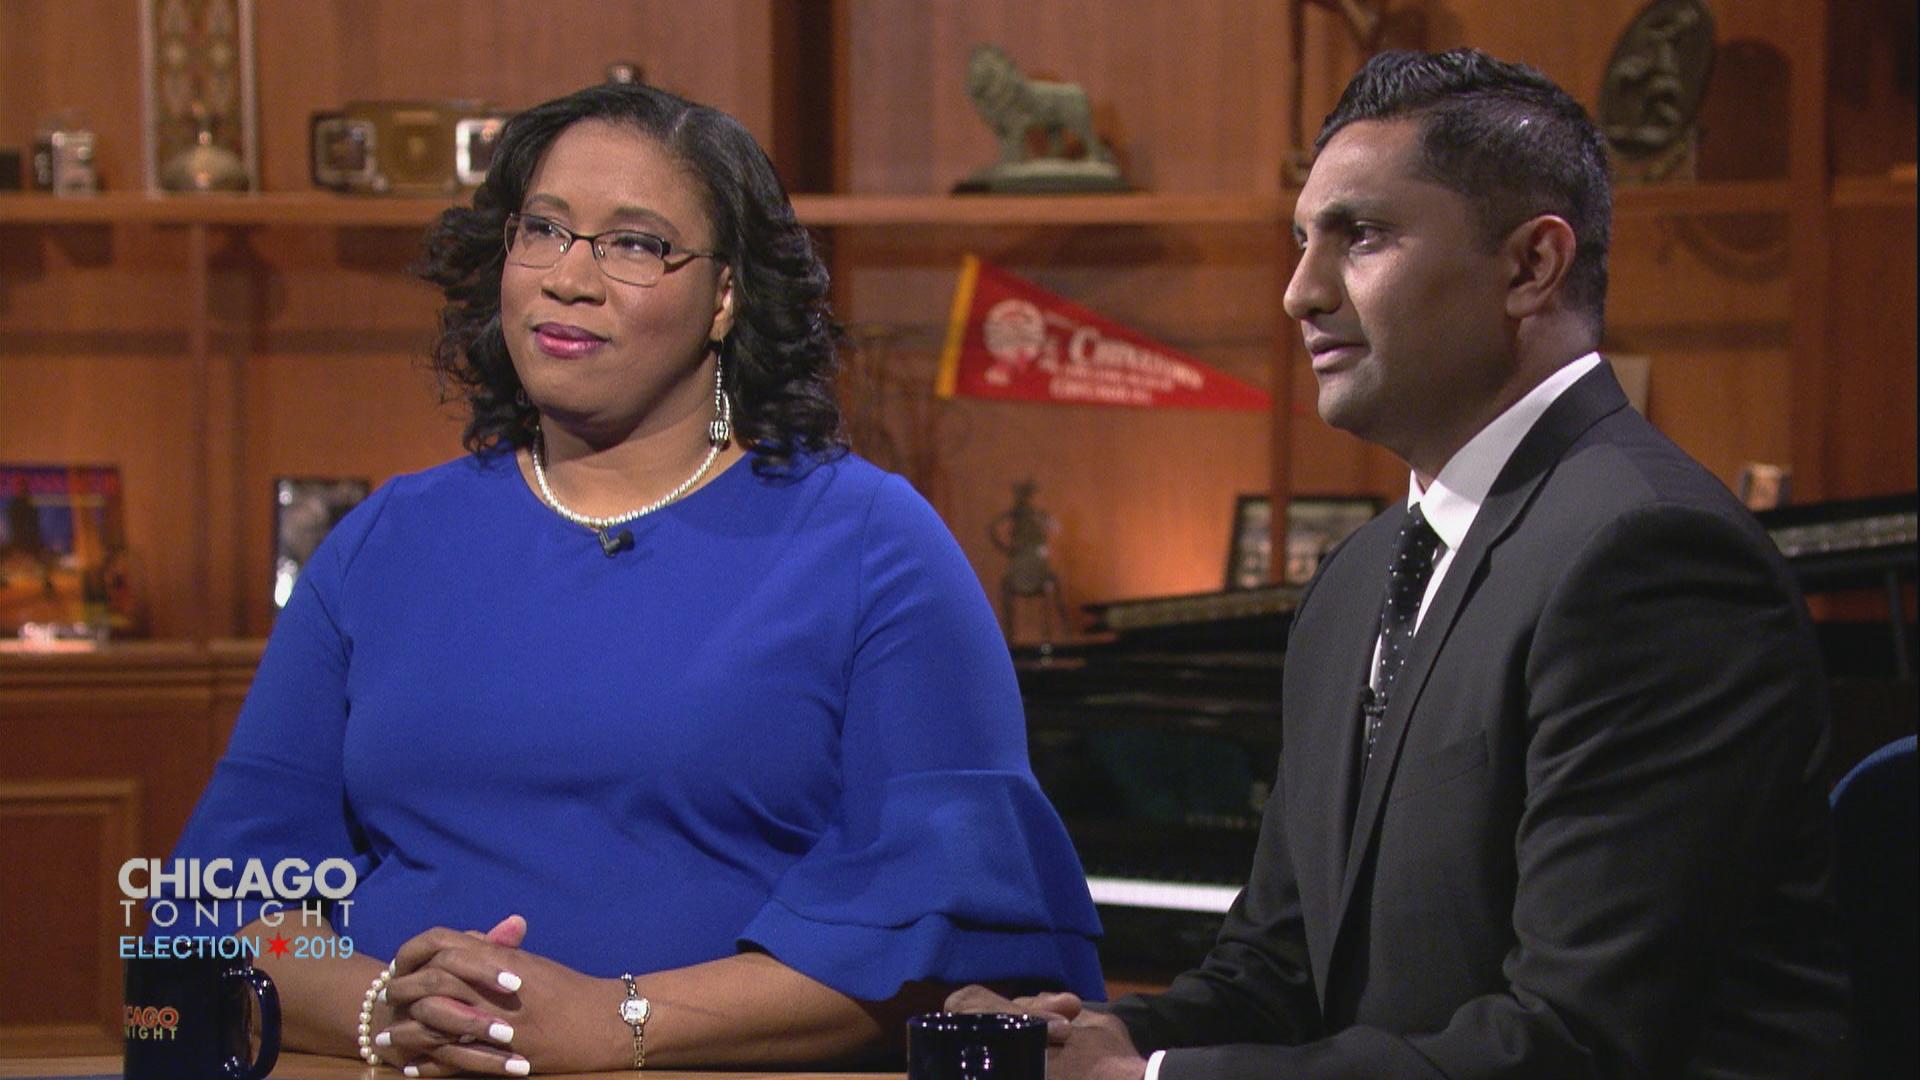 City treasurer candidates Melissa Conyears-Ervin and Ameya Pawar participate in a “Chicago Tonight” forum on March 18, 2019.